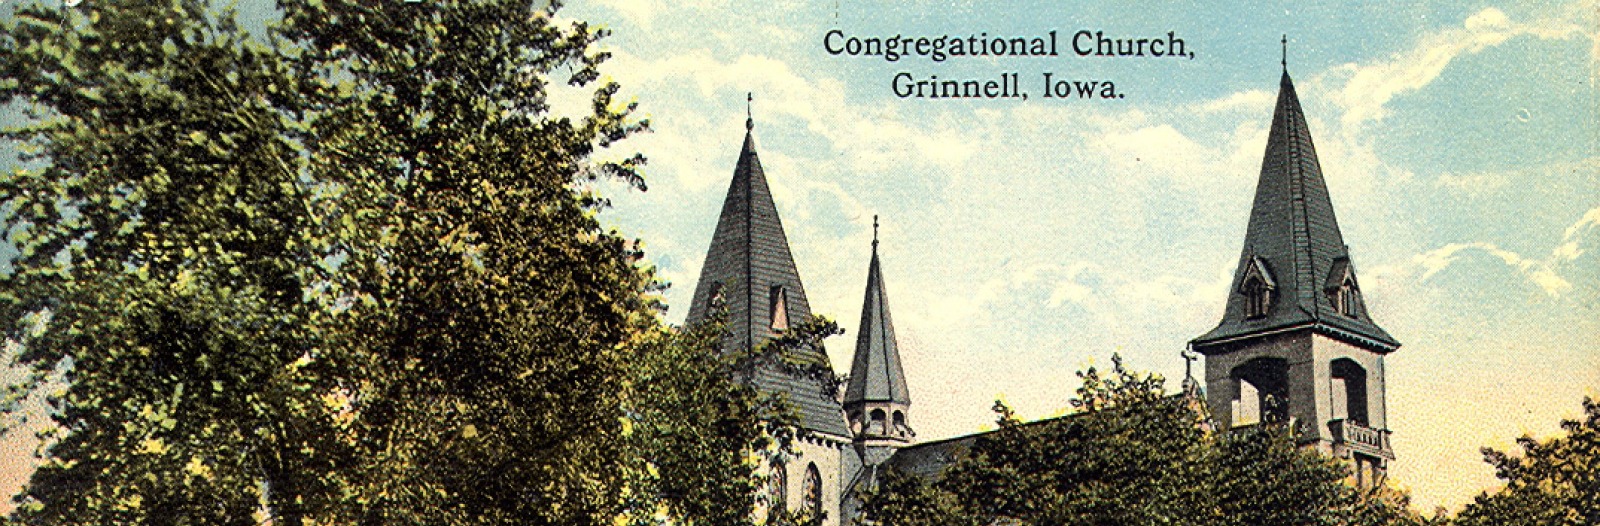 Congregational Church in Grinnell, Iowa